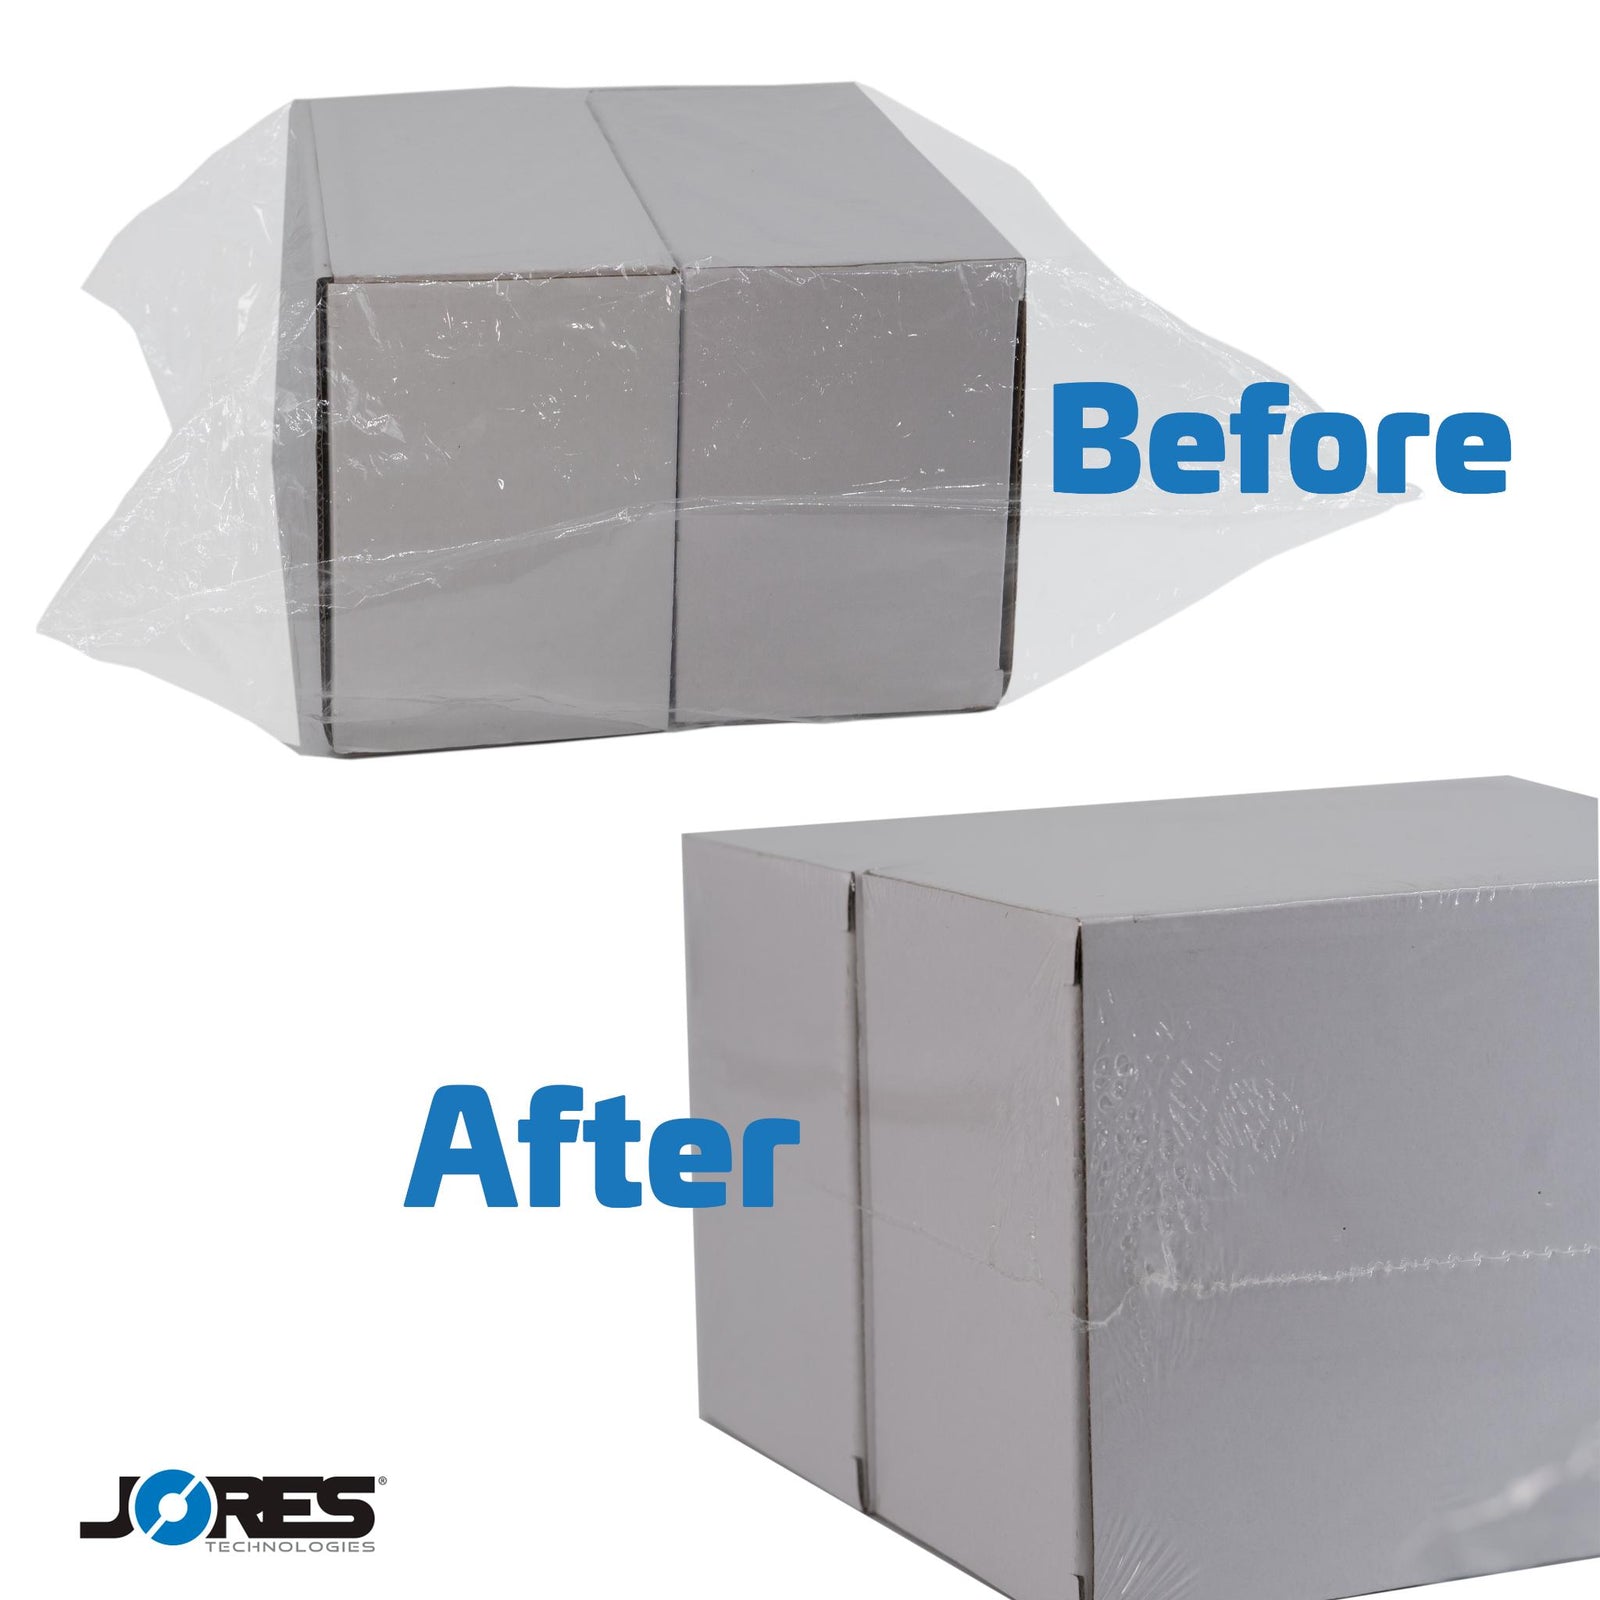 Aprearance of a product before and after entering a shrink wrapping tunnel